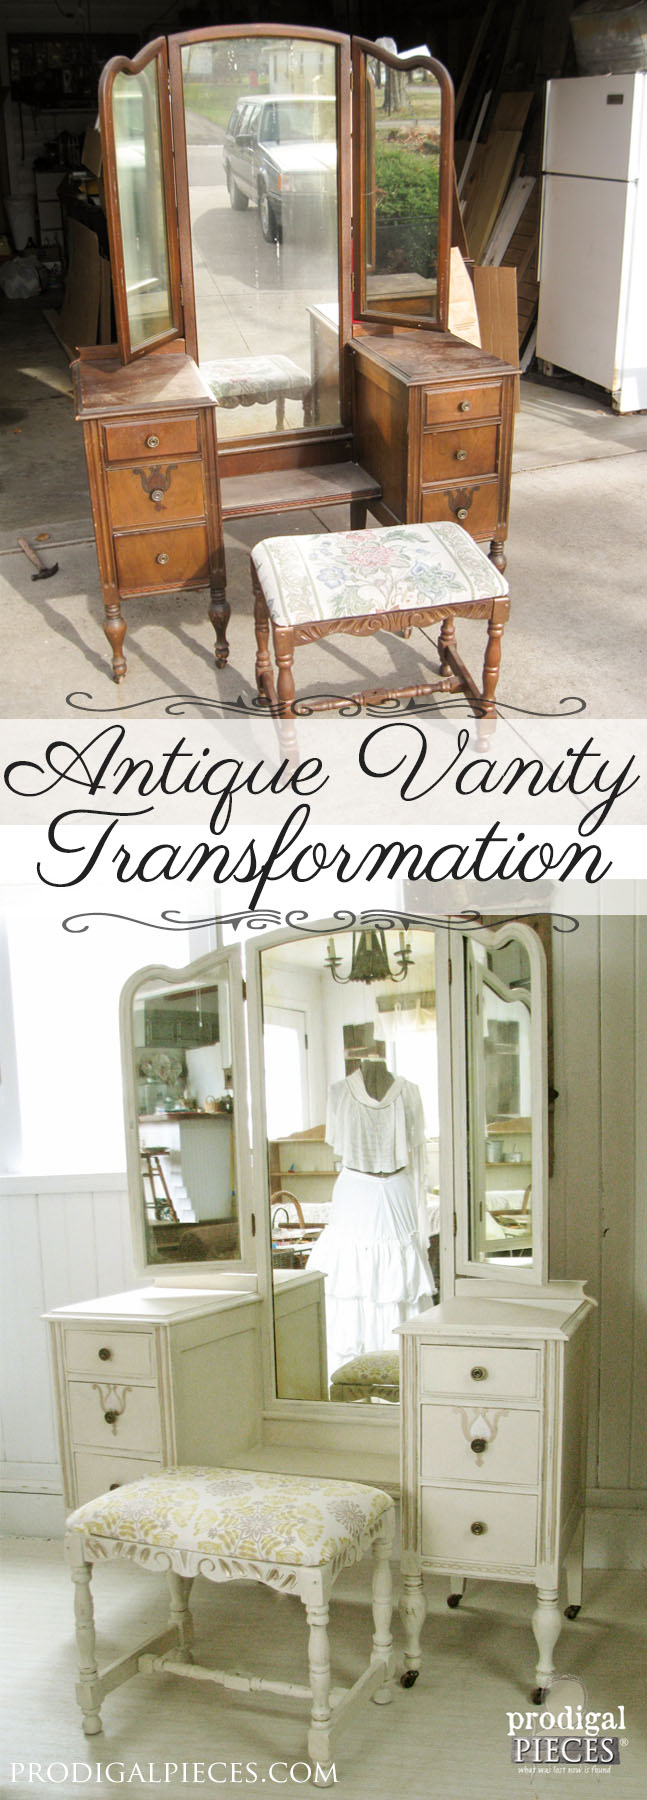 An Antique Trifold Vanity Transformation by Prodigal Pieces | prodigalpieces.com